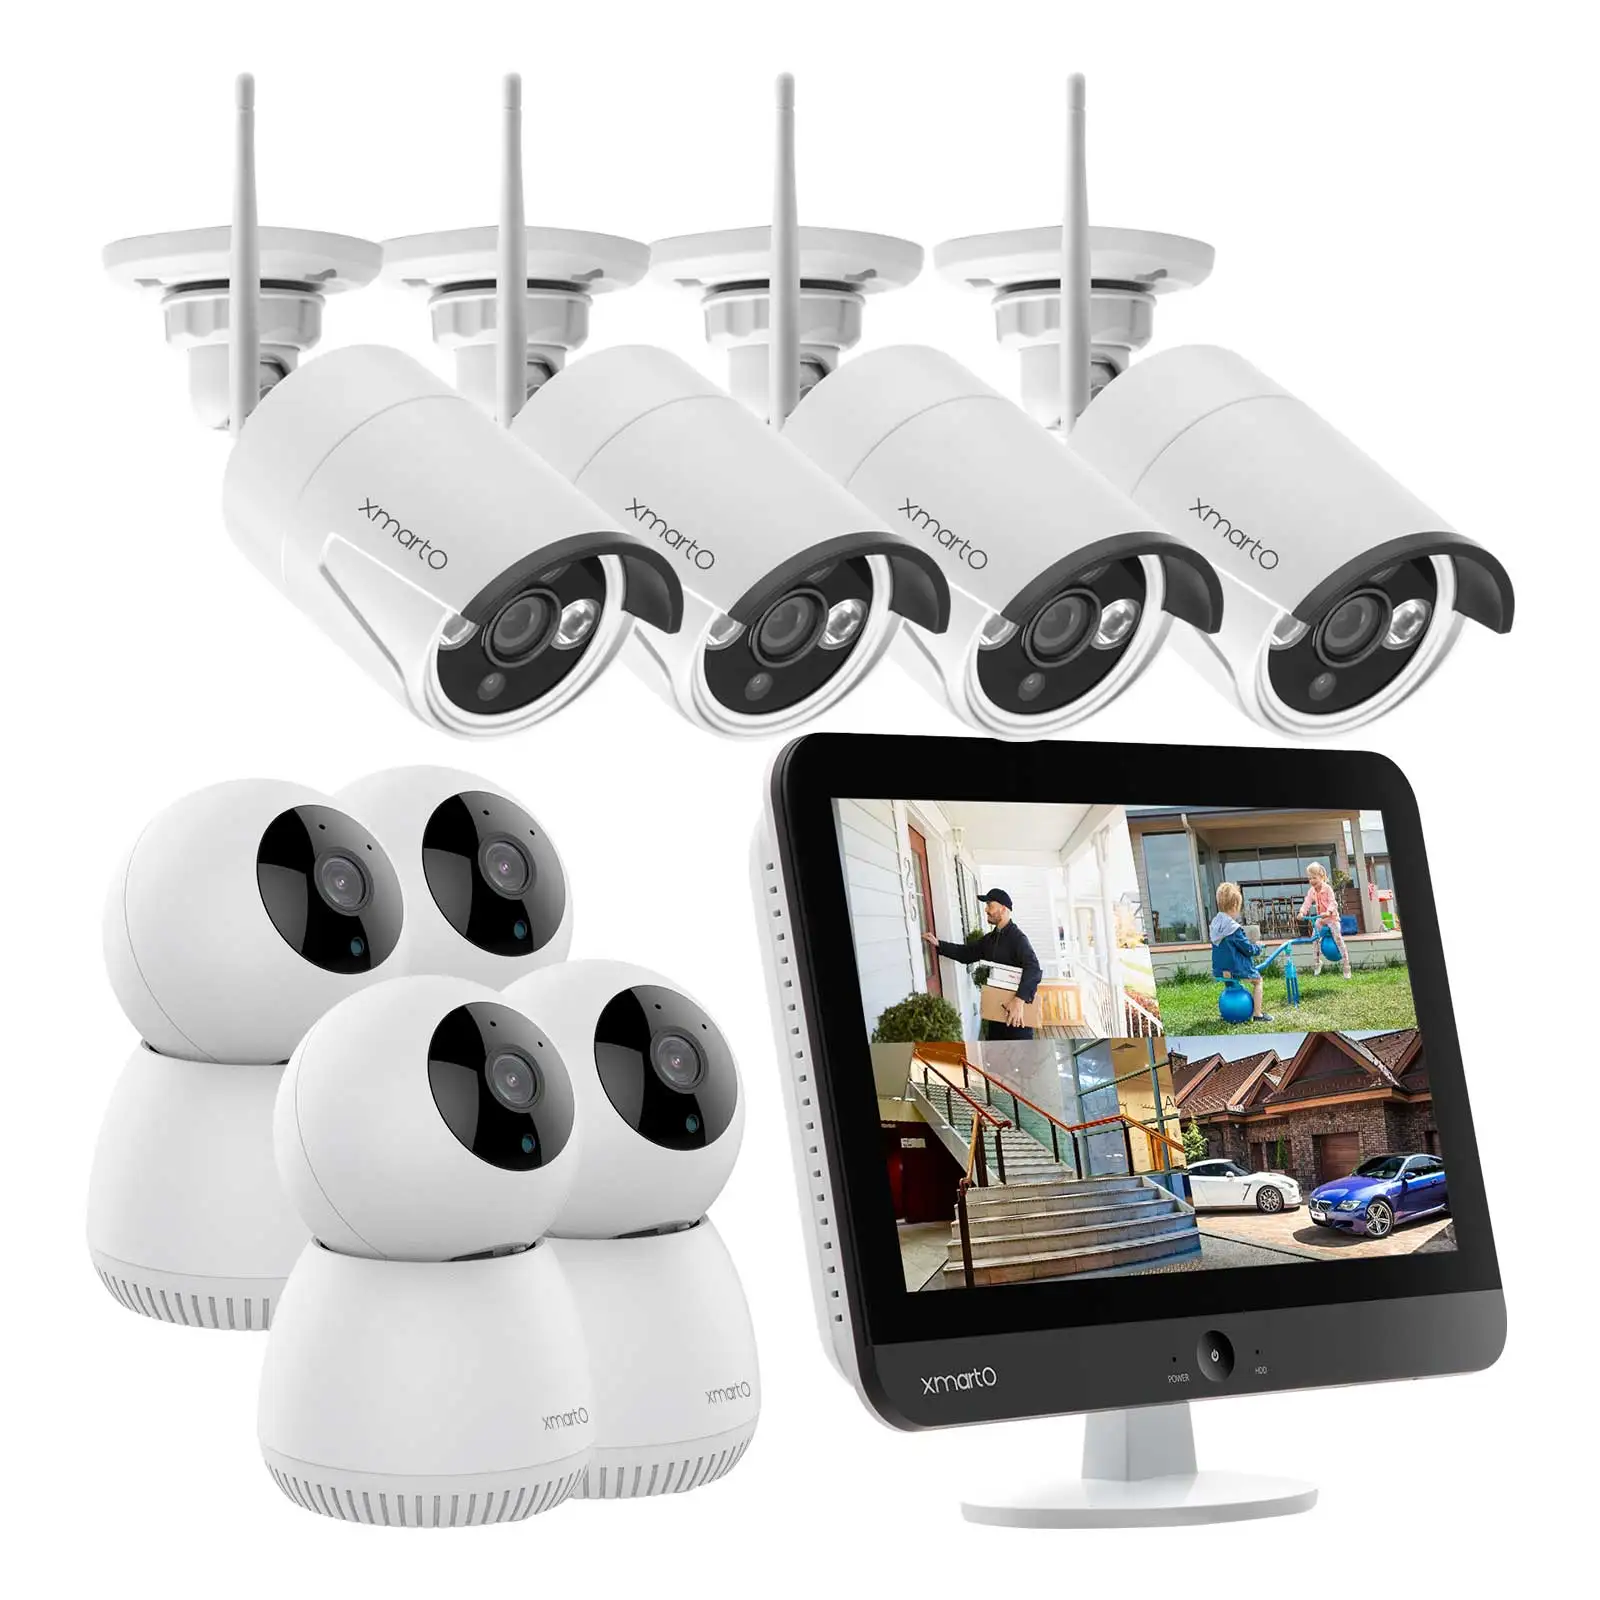 Works with iOS/Android Apps and NVRs Night Vision Motion Detection MSG XMARTO 2K Security Camera Indoor Wireless WiFi Pan Tilt Zoom Camera with Auto Tracking,IP Camera with 2-Way Audio DPI2024